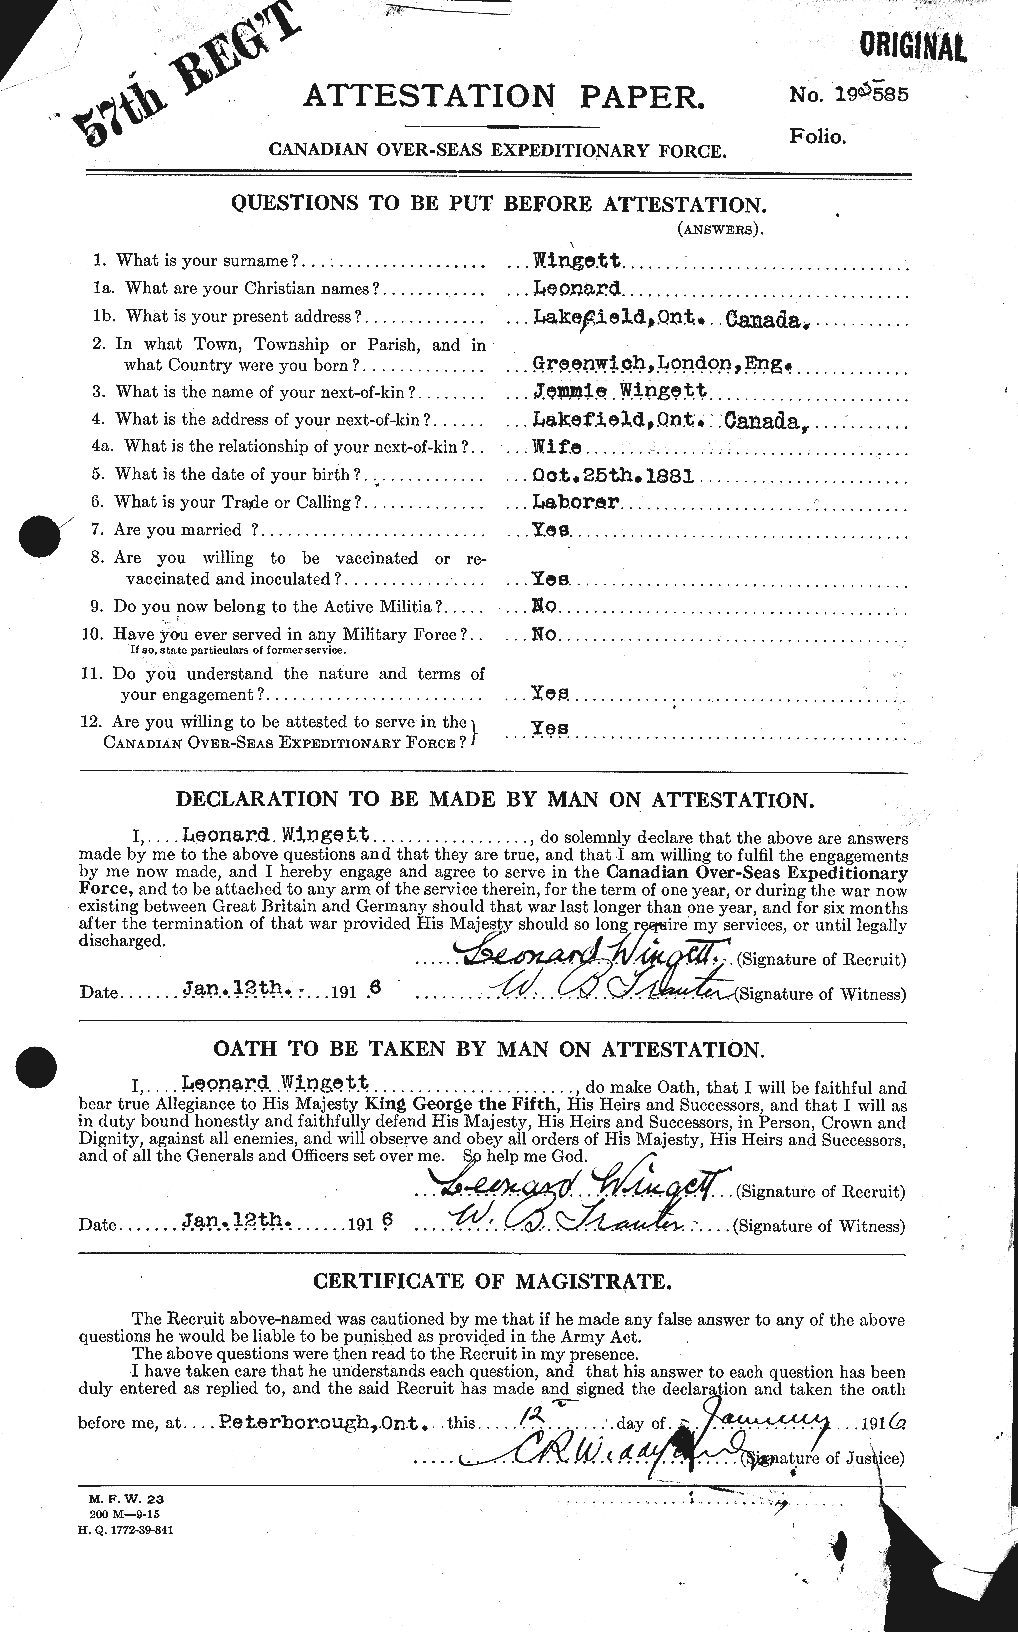 Personnel Records of the First World War - CEF 678996a